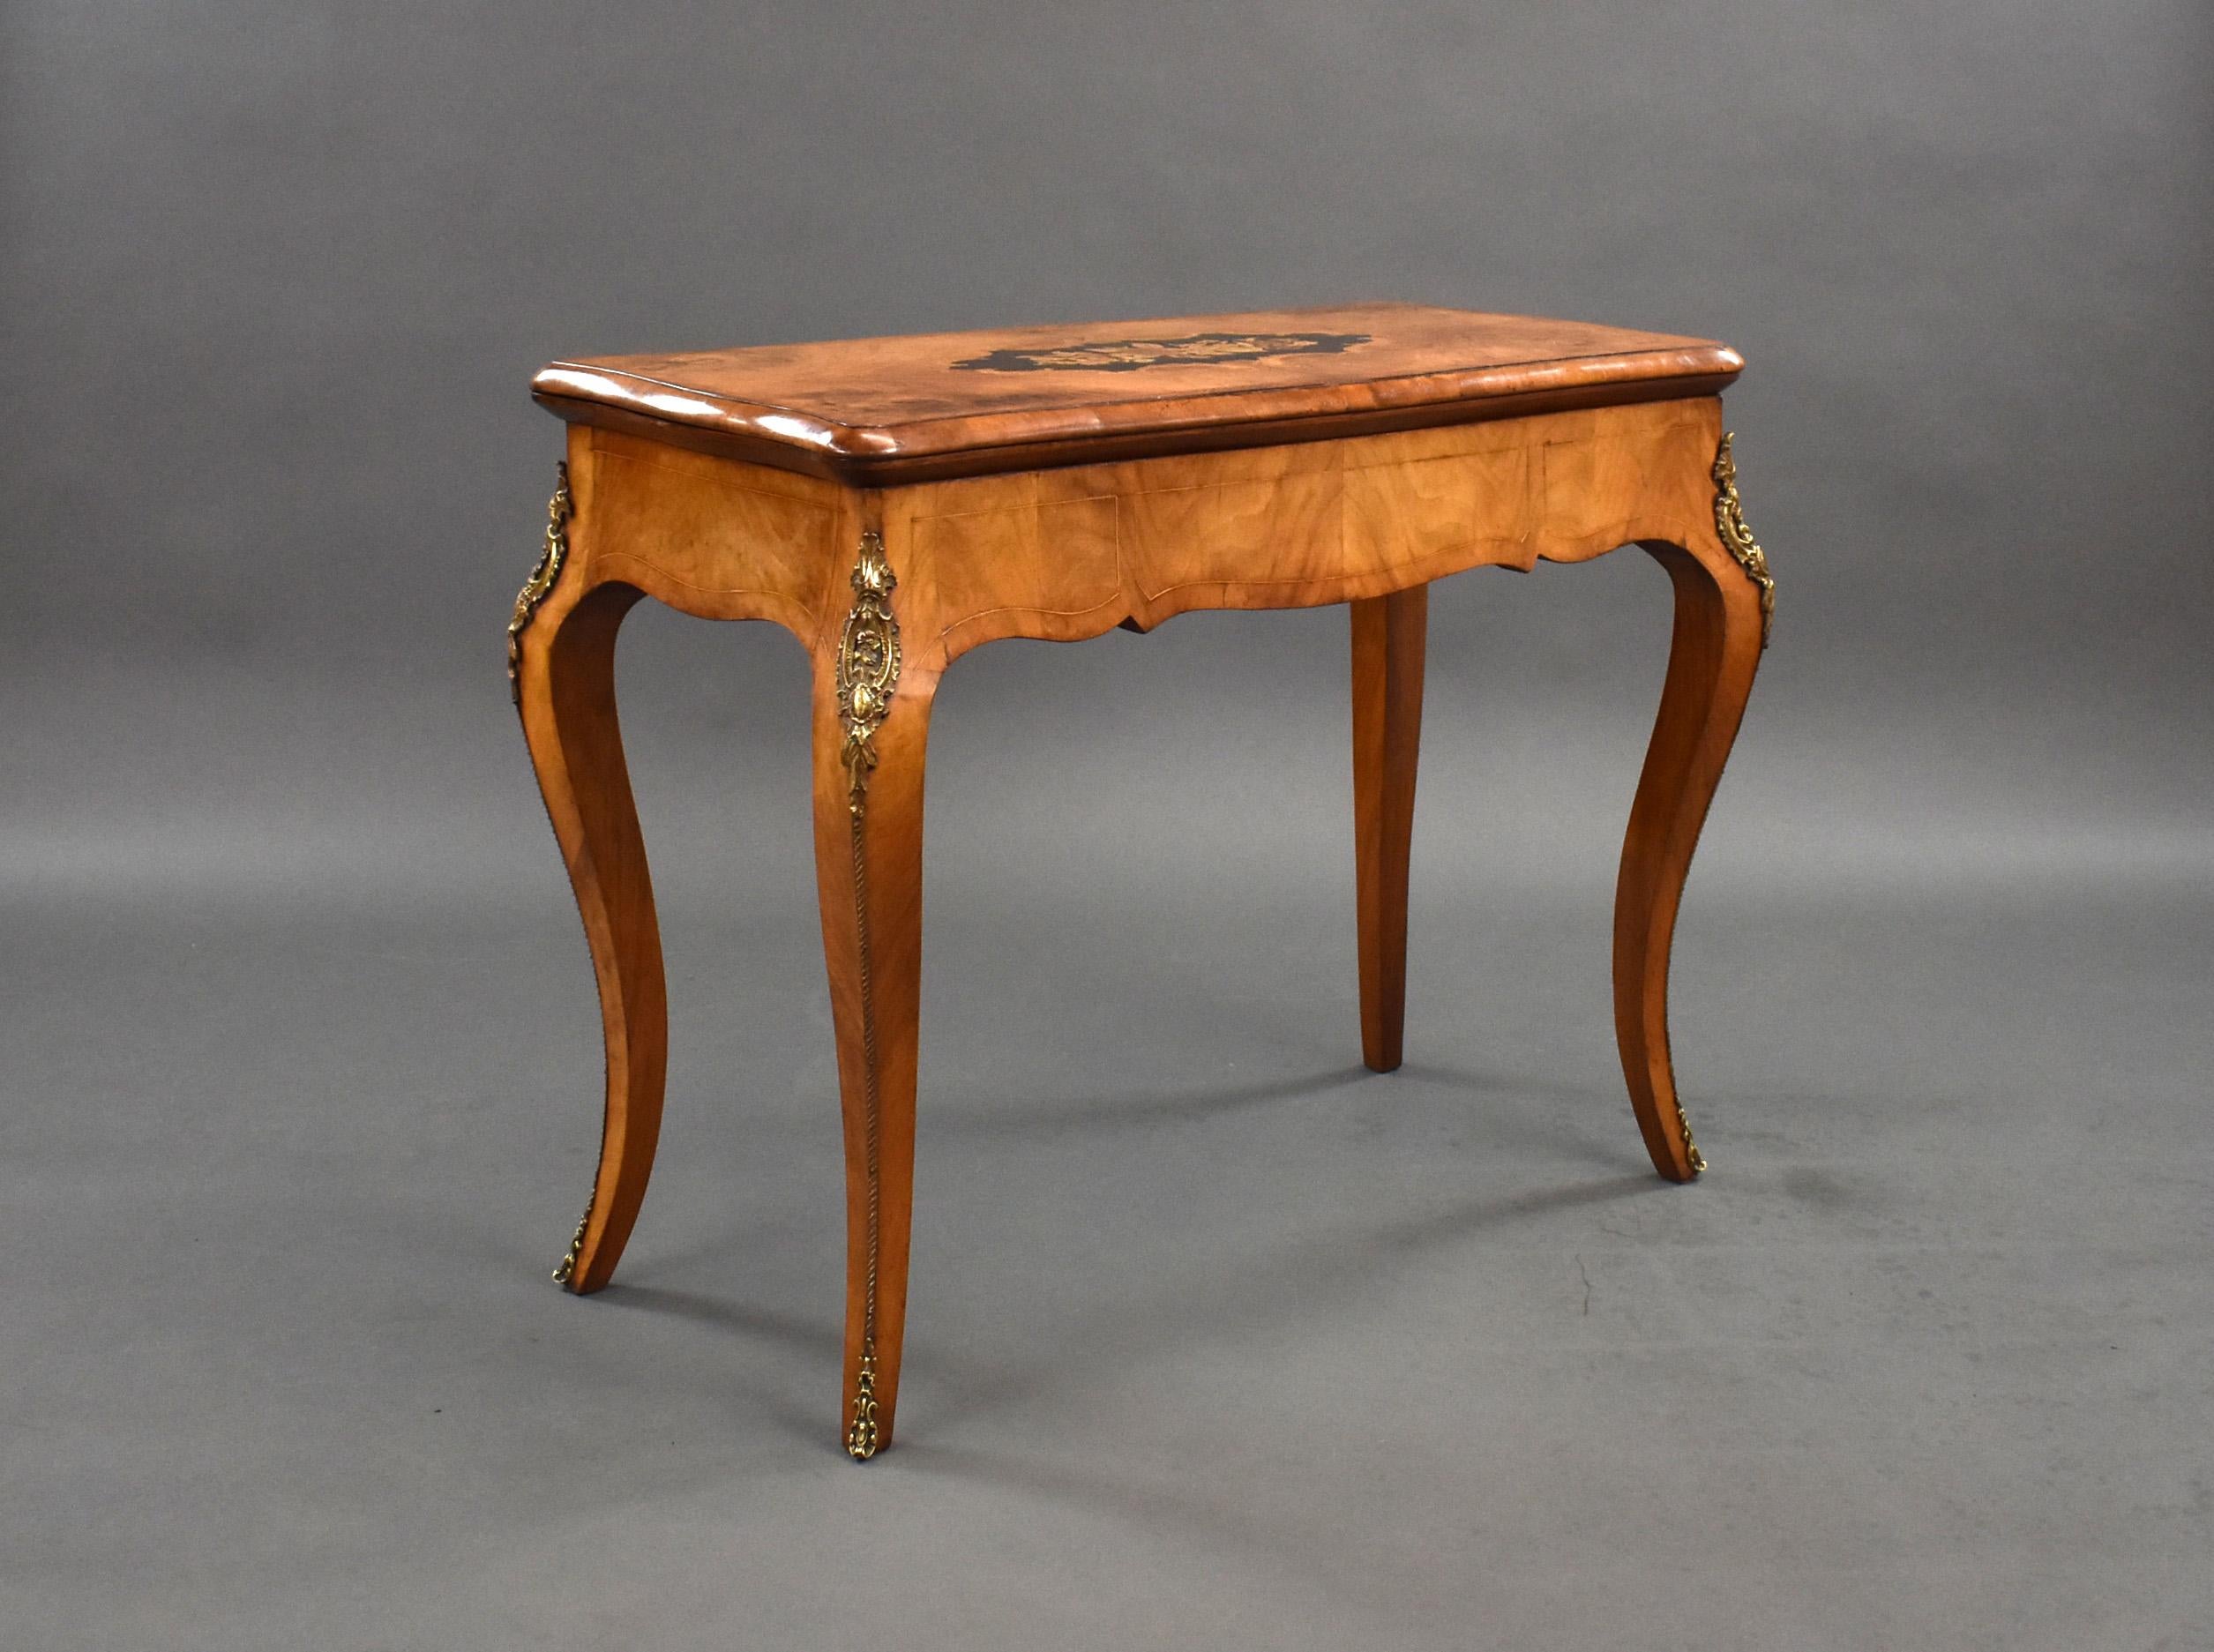 For sale is a good quality Victorian burr walnut marquetry inlaid fold over card table, having a marquetry inlaid top, this swivels and folds over to reveal a green baize lined interior, standing on elegant legs decorated with metal mounts, the card